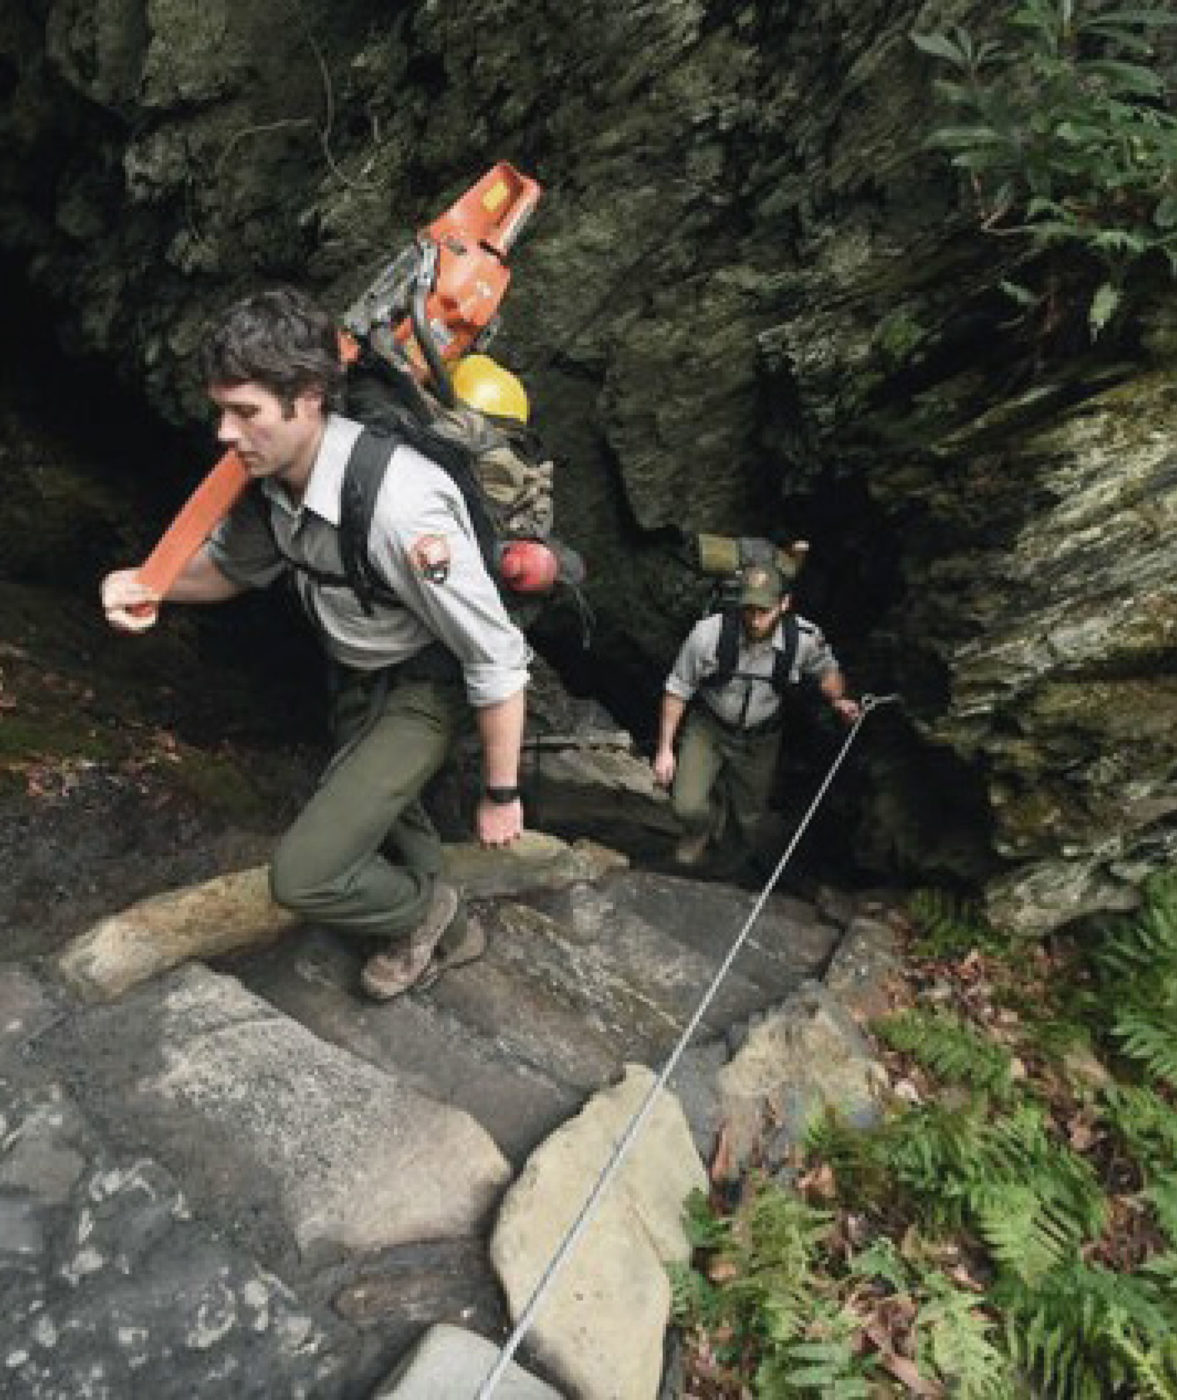 Park rangers climb the staircase at the Chimney Tops trail in the Great Smoky Mountains National Park.